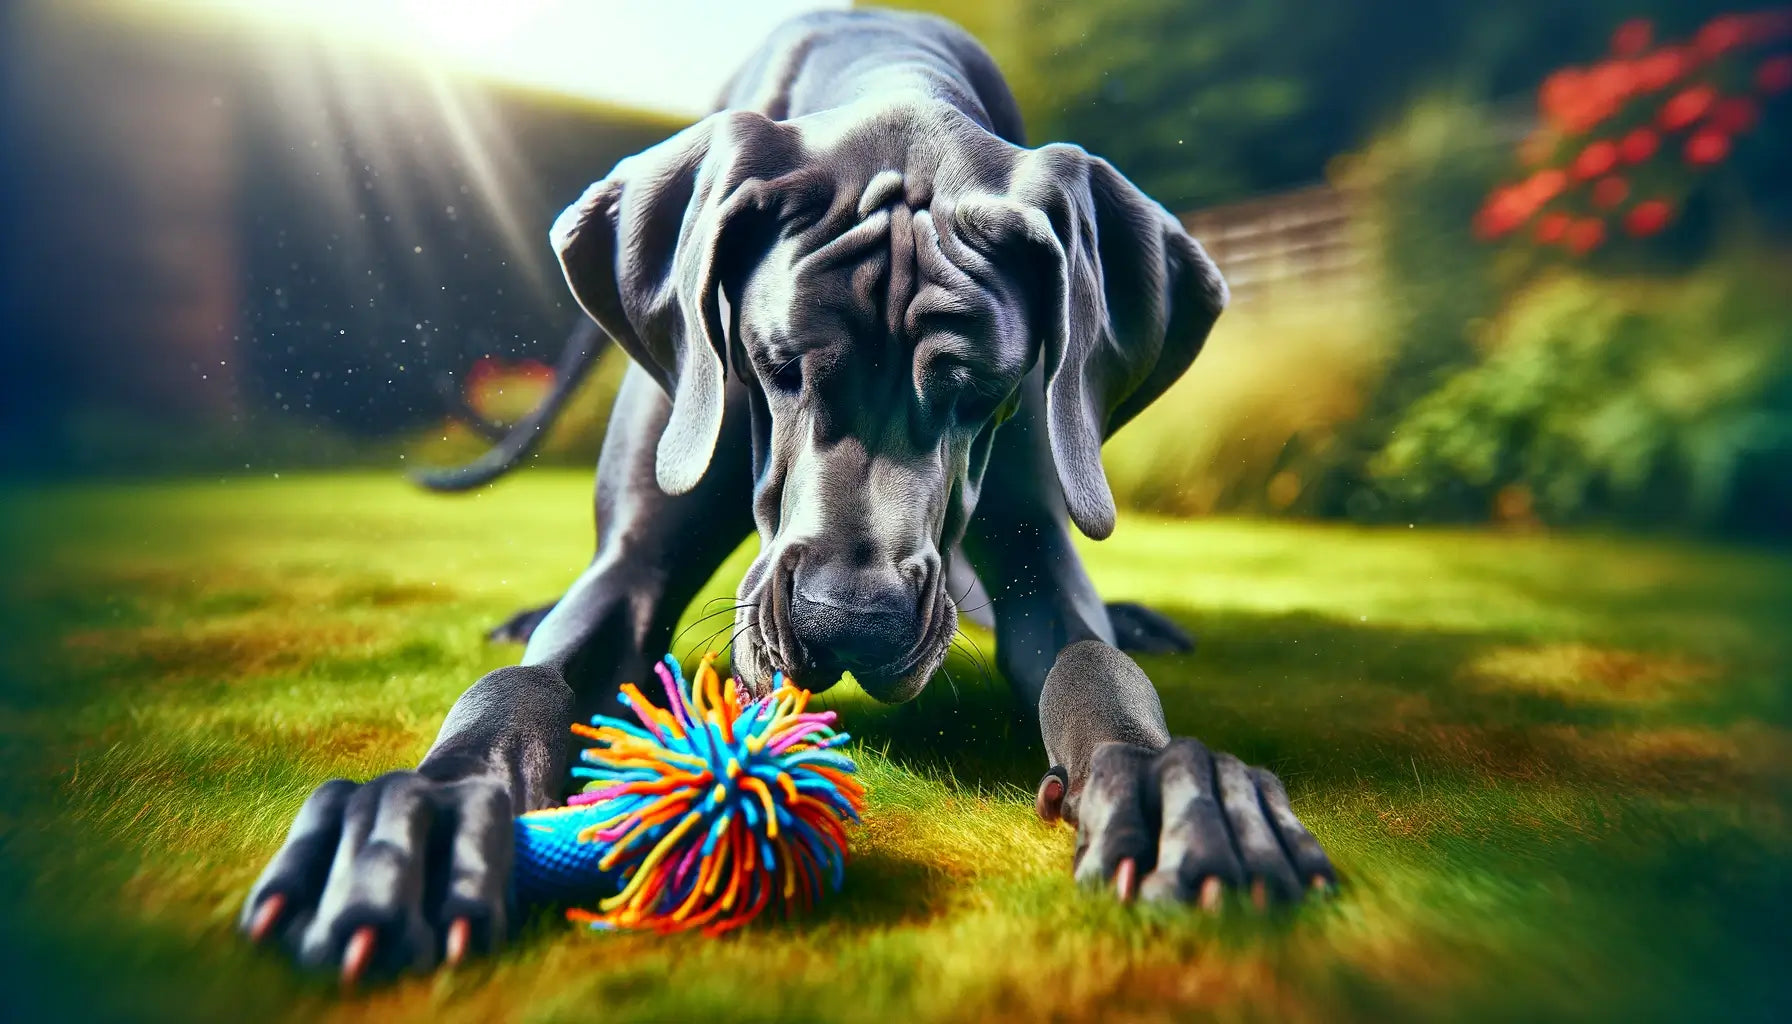 Blue Great Dane engaging with a toy on a grassy lawn, reflecting the breed's friendly disposition and love for playful interaction.